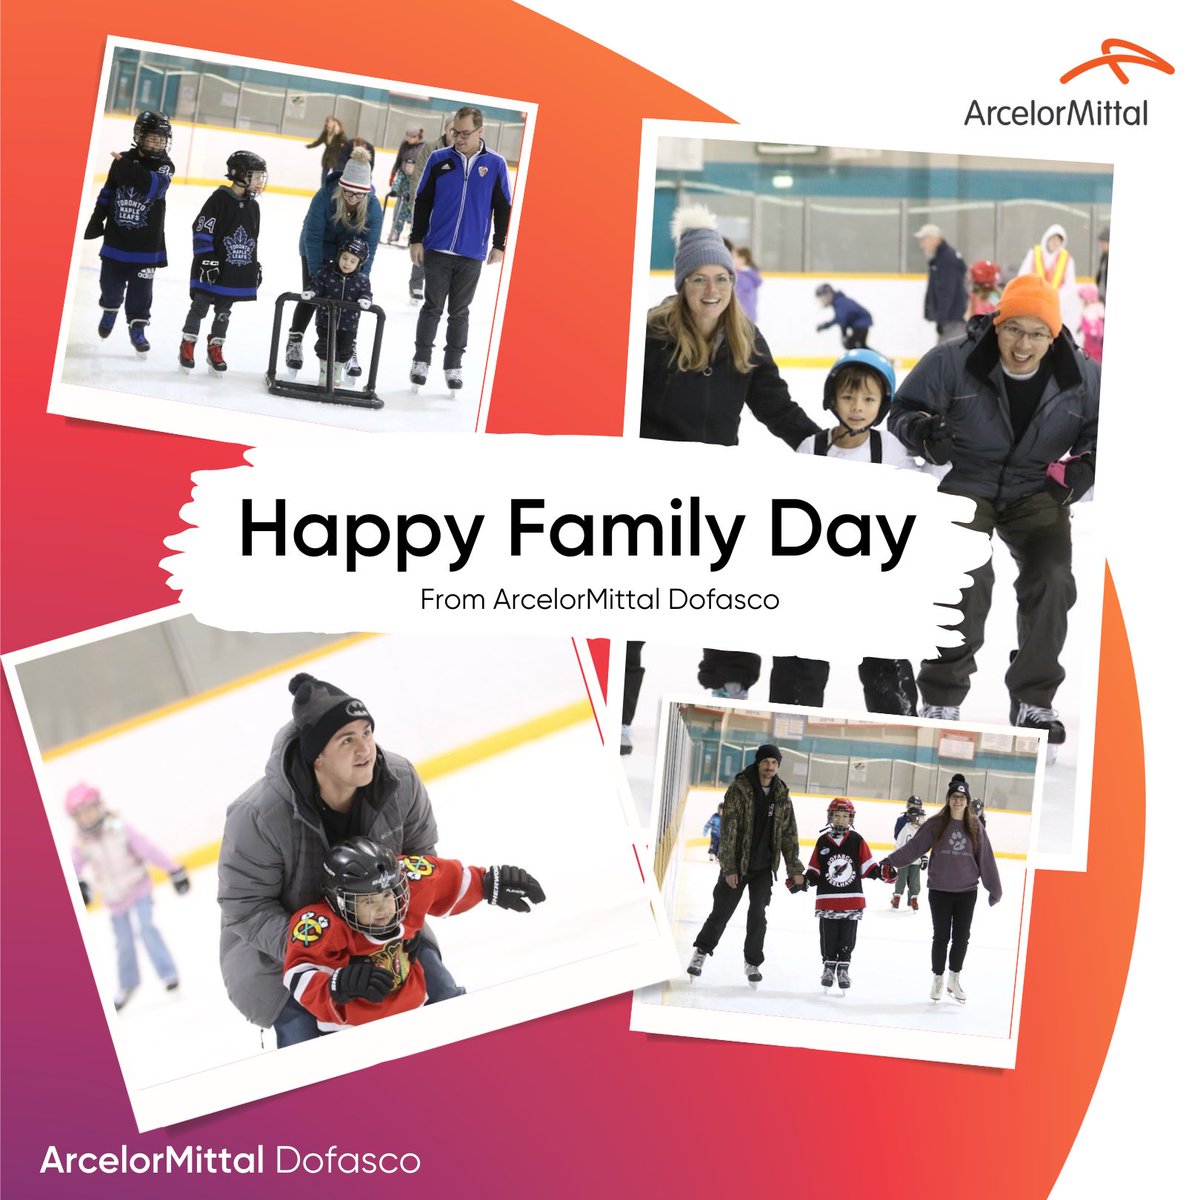 Happy Family Day! We were thrilled to welcome employees, retirees and their families to the F.H. Sherman Rec Centre for a skate. Thanks to all for making this a successful event. Thanks also to our colleagues keeping the steel rolling today, and everyday.